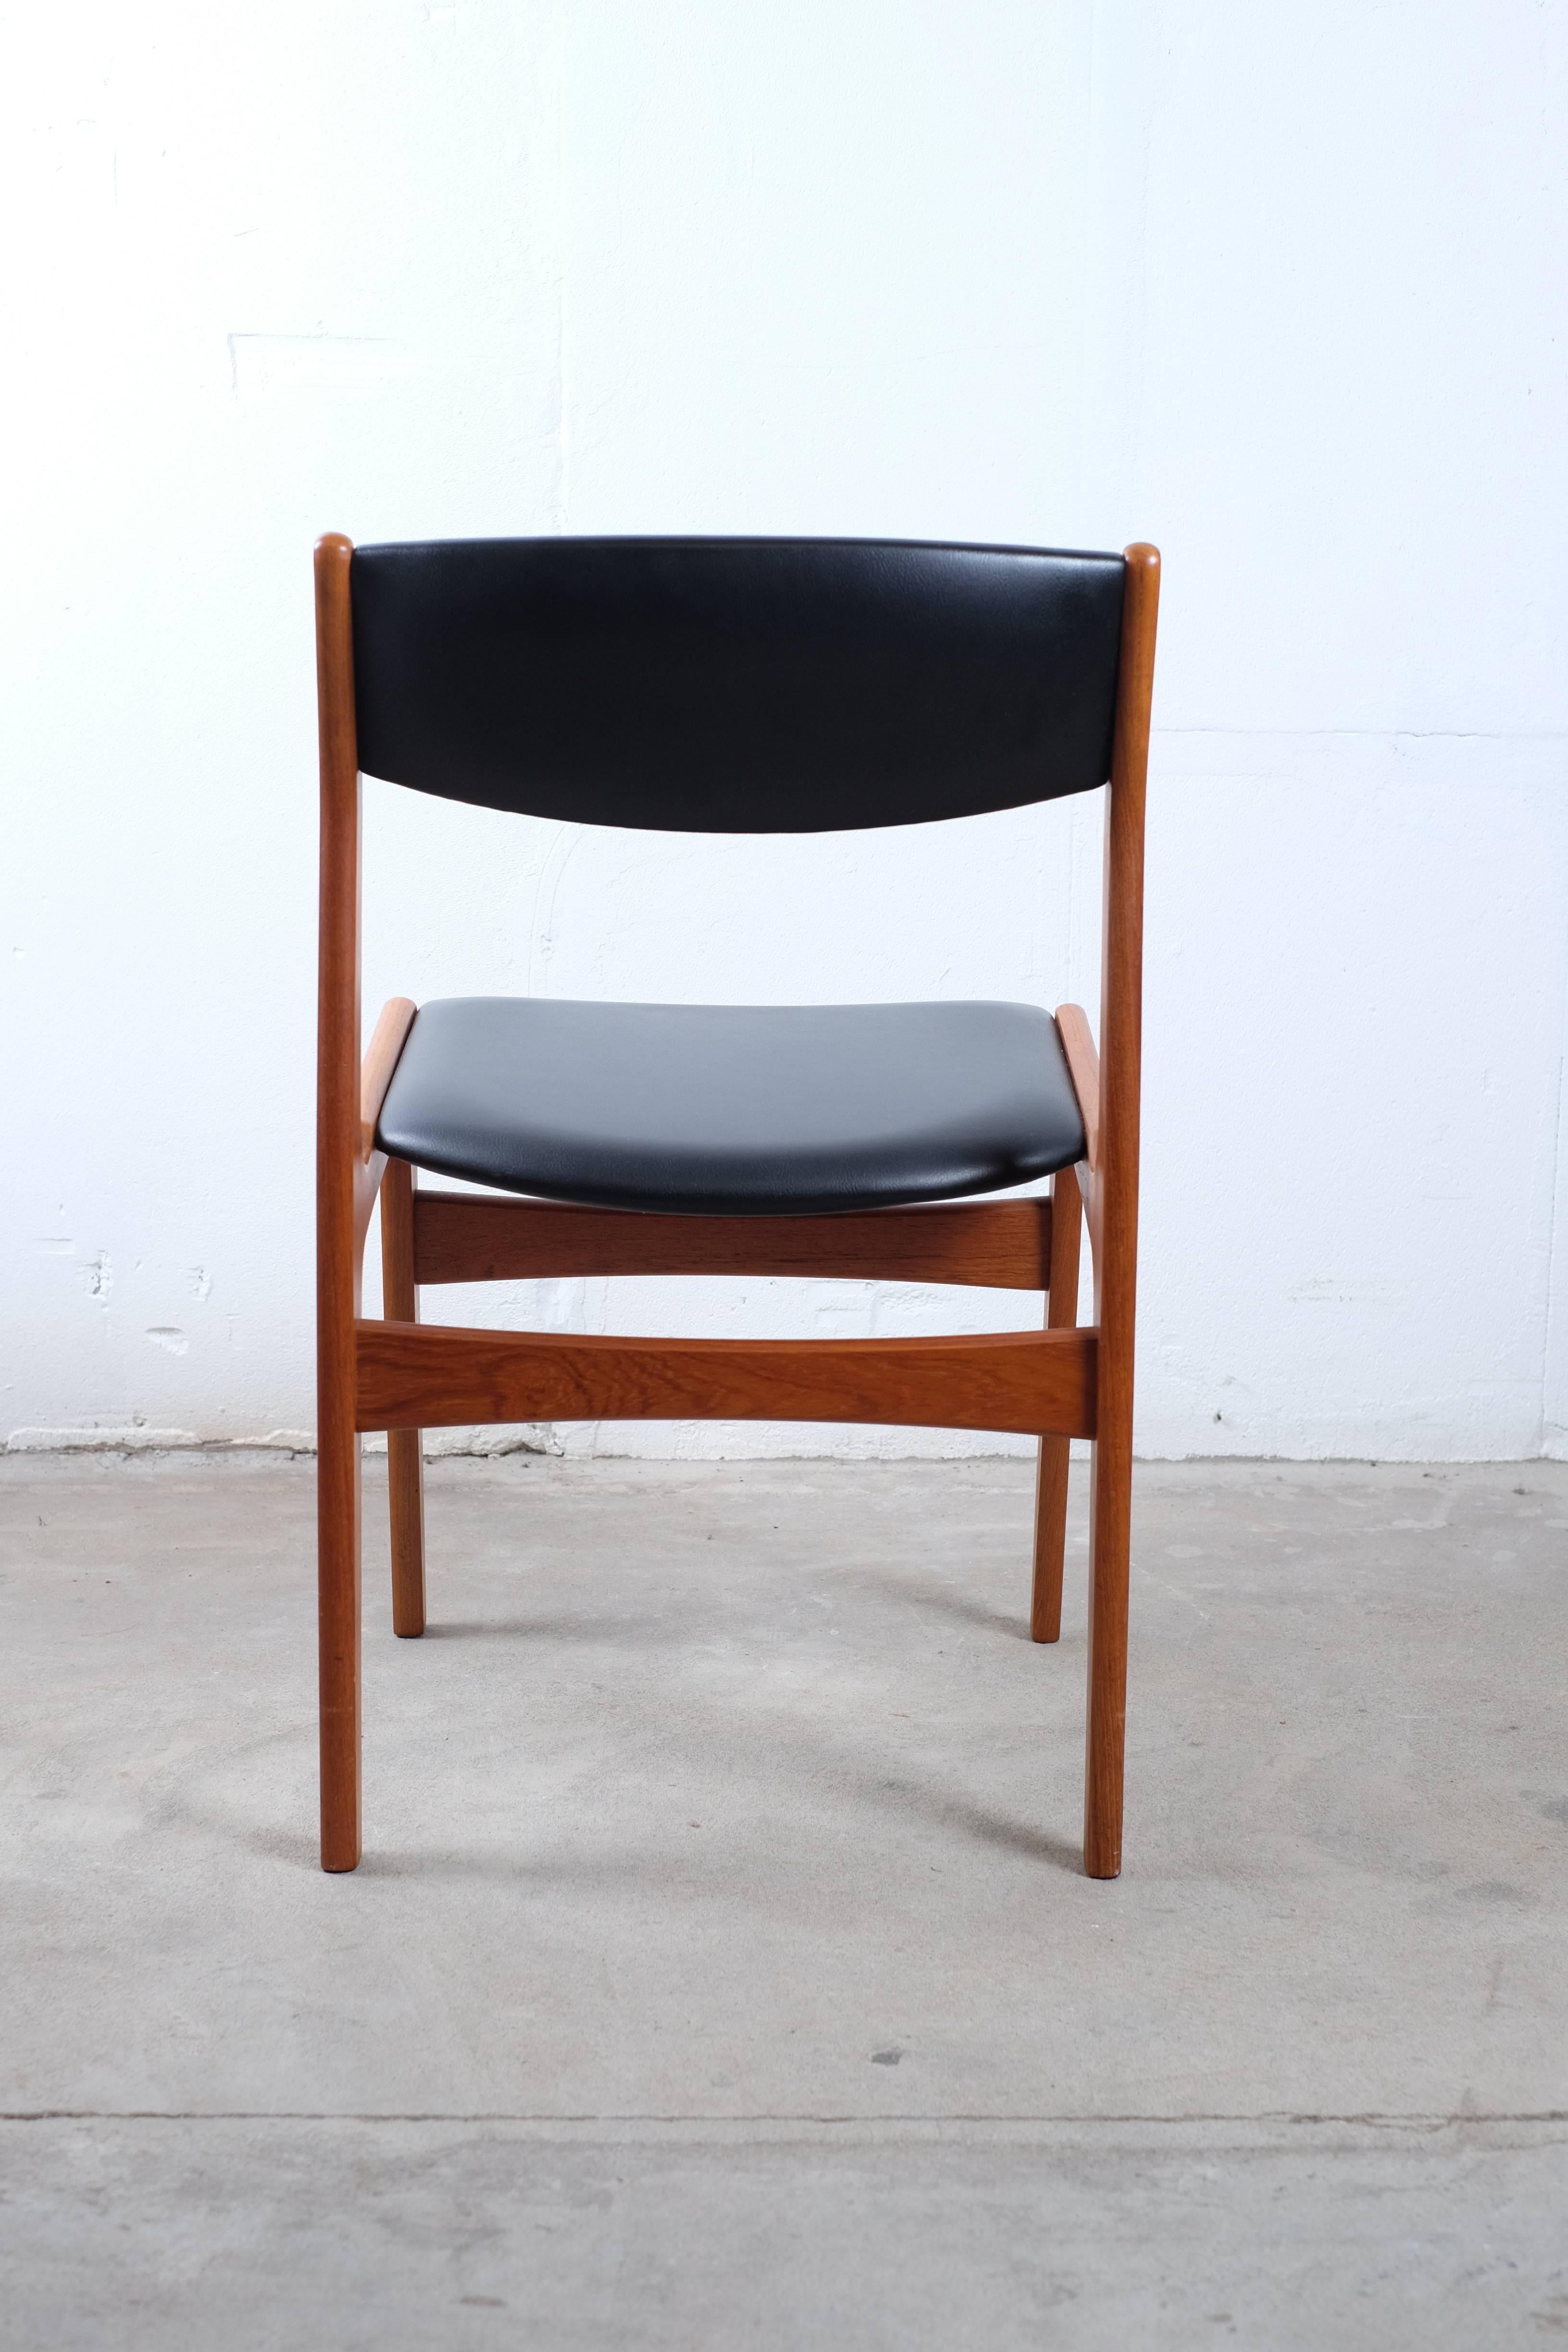 Mid-20th Century Set of Six Dining Chairs in Teak by Nova, Danish Design For Sale